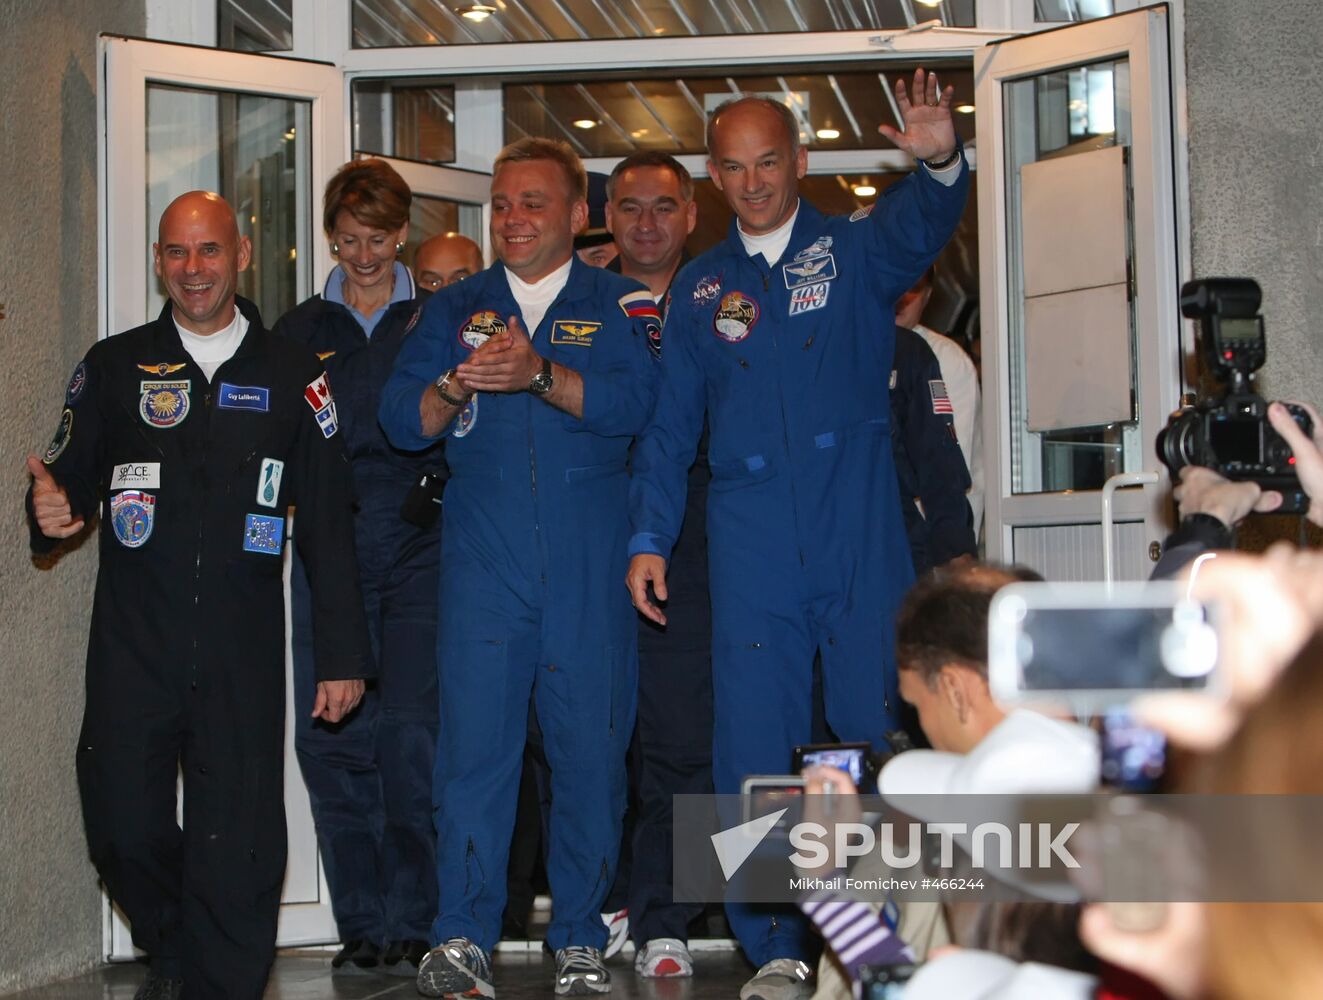 ISS mission crew prepares for launch